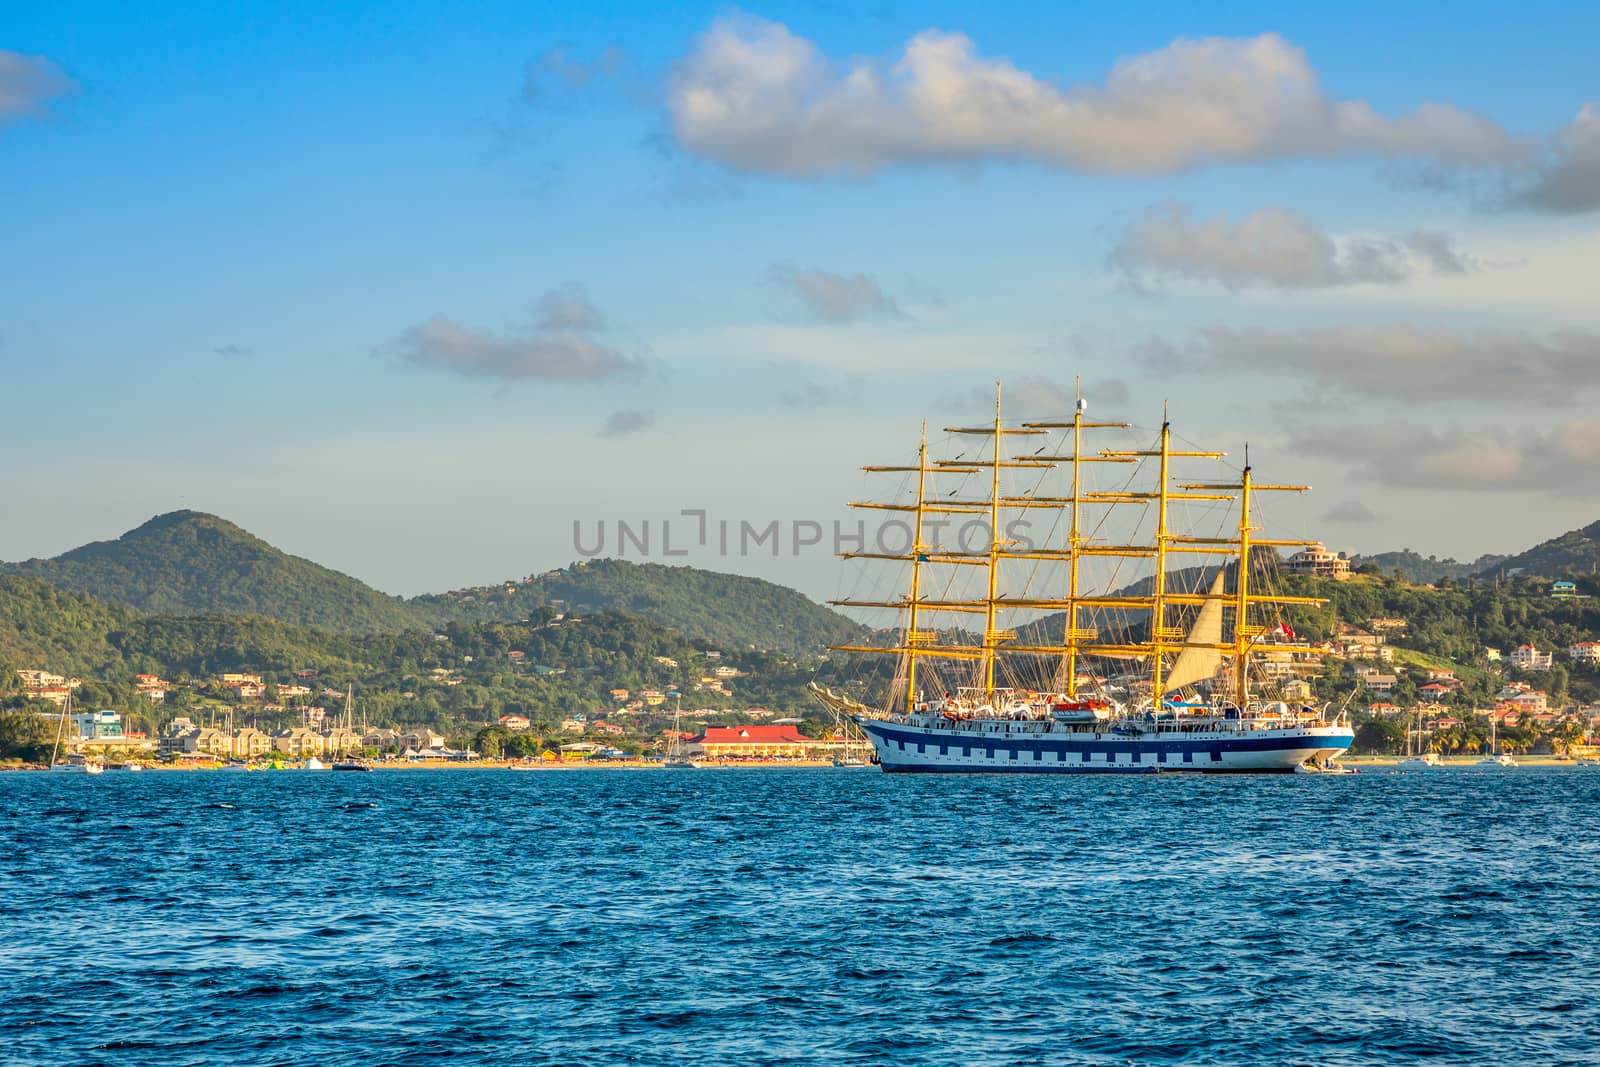 big naval clipper anchored at the Rodney bay with town in the background, Saint Lucia, Caribbean sea